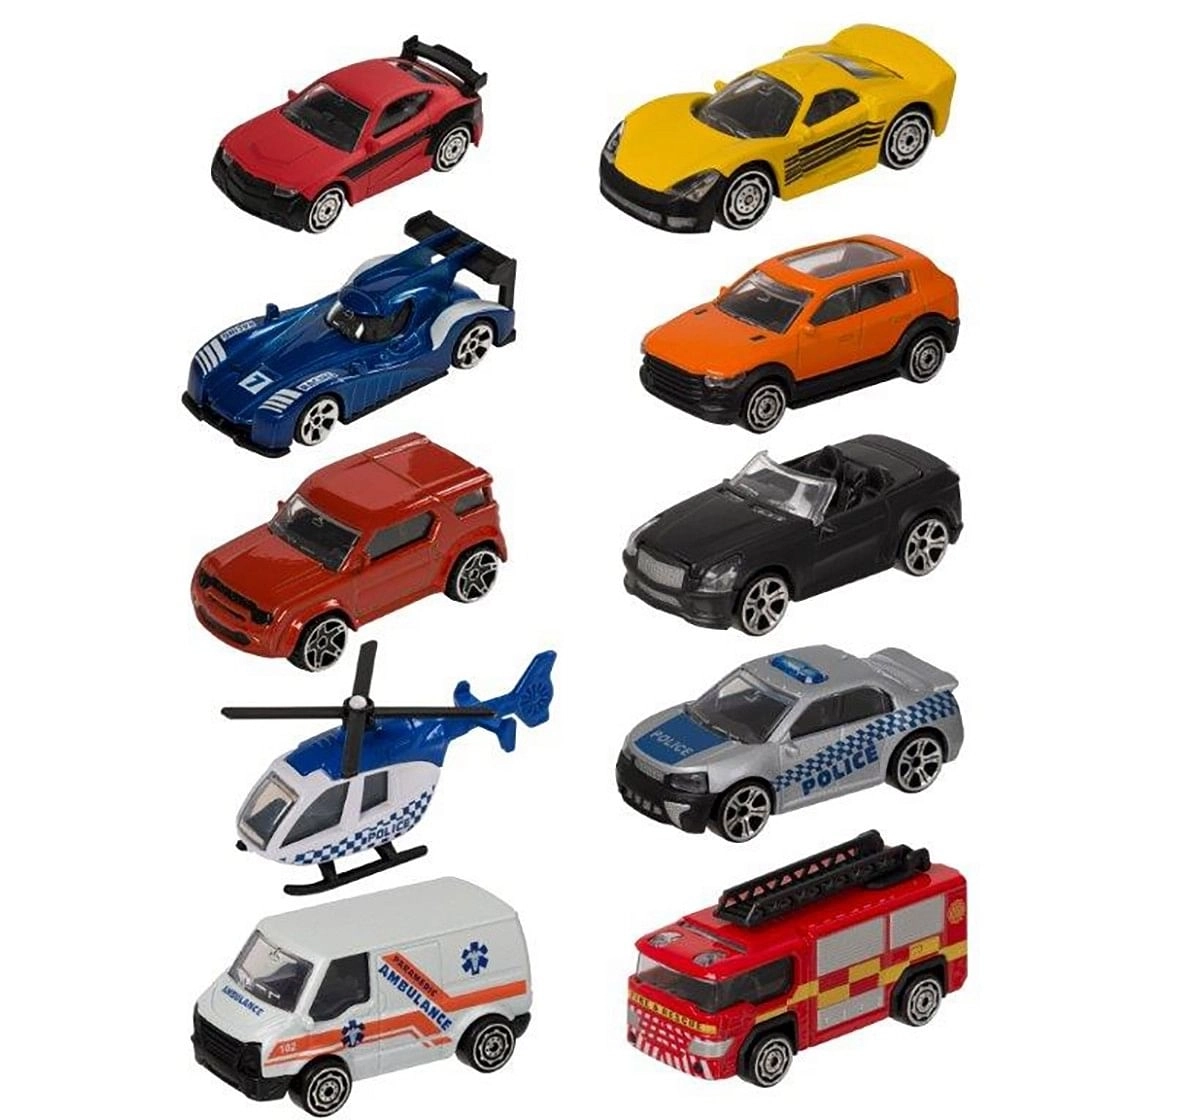 Ralleyz 3" Die Cast Car 10 Pack Assorted Vehicles Vehicles for Kids age 3Y+ 